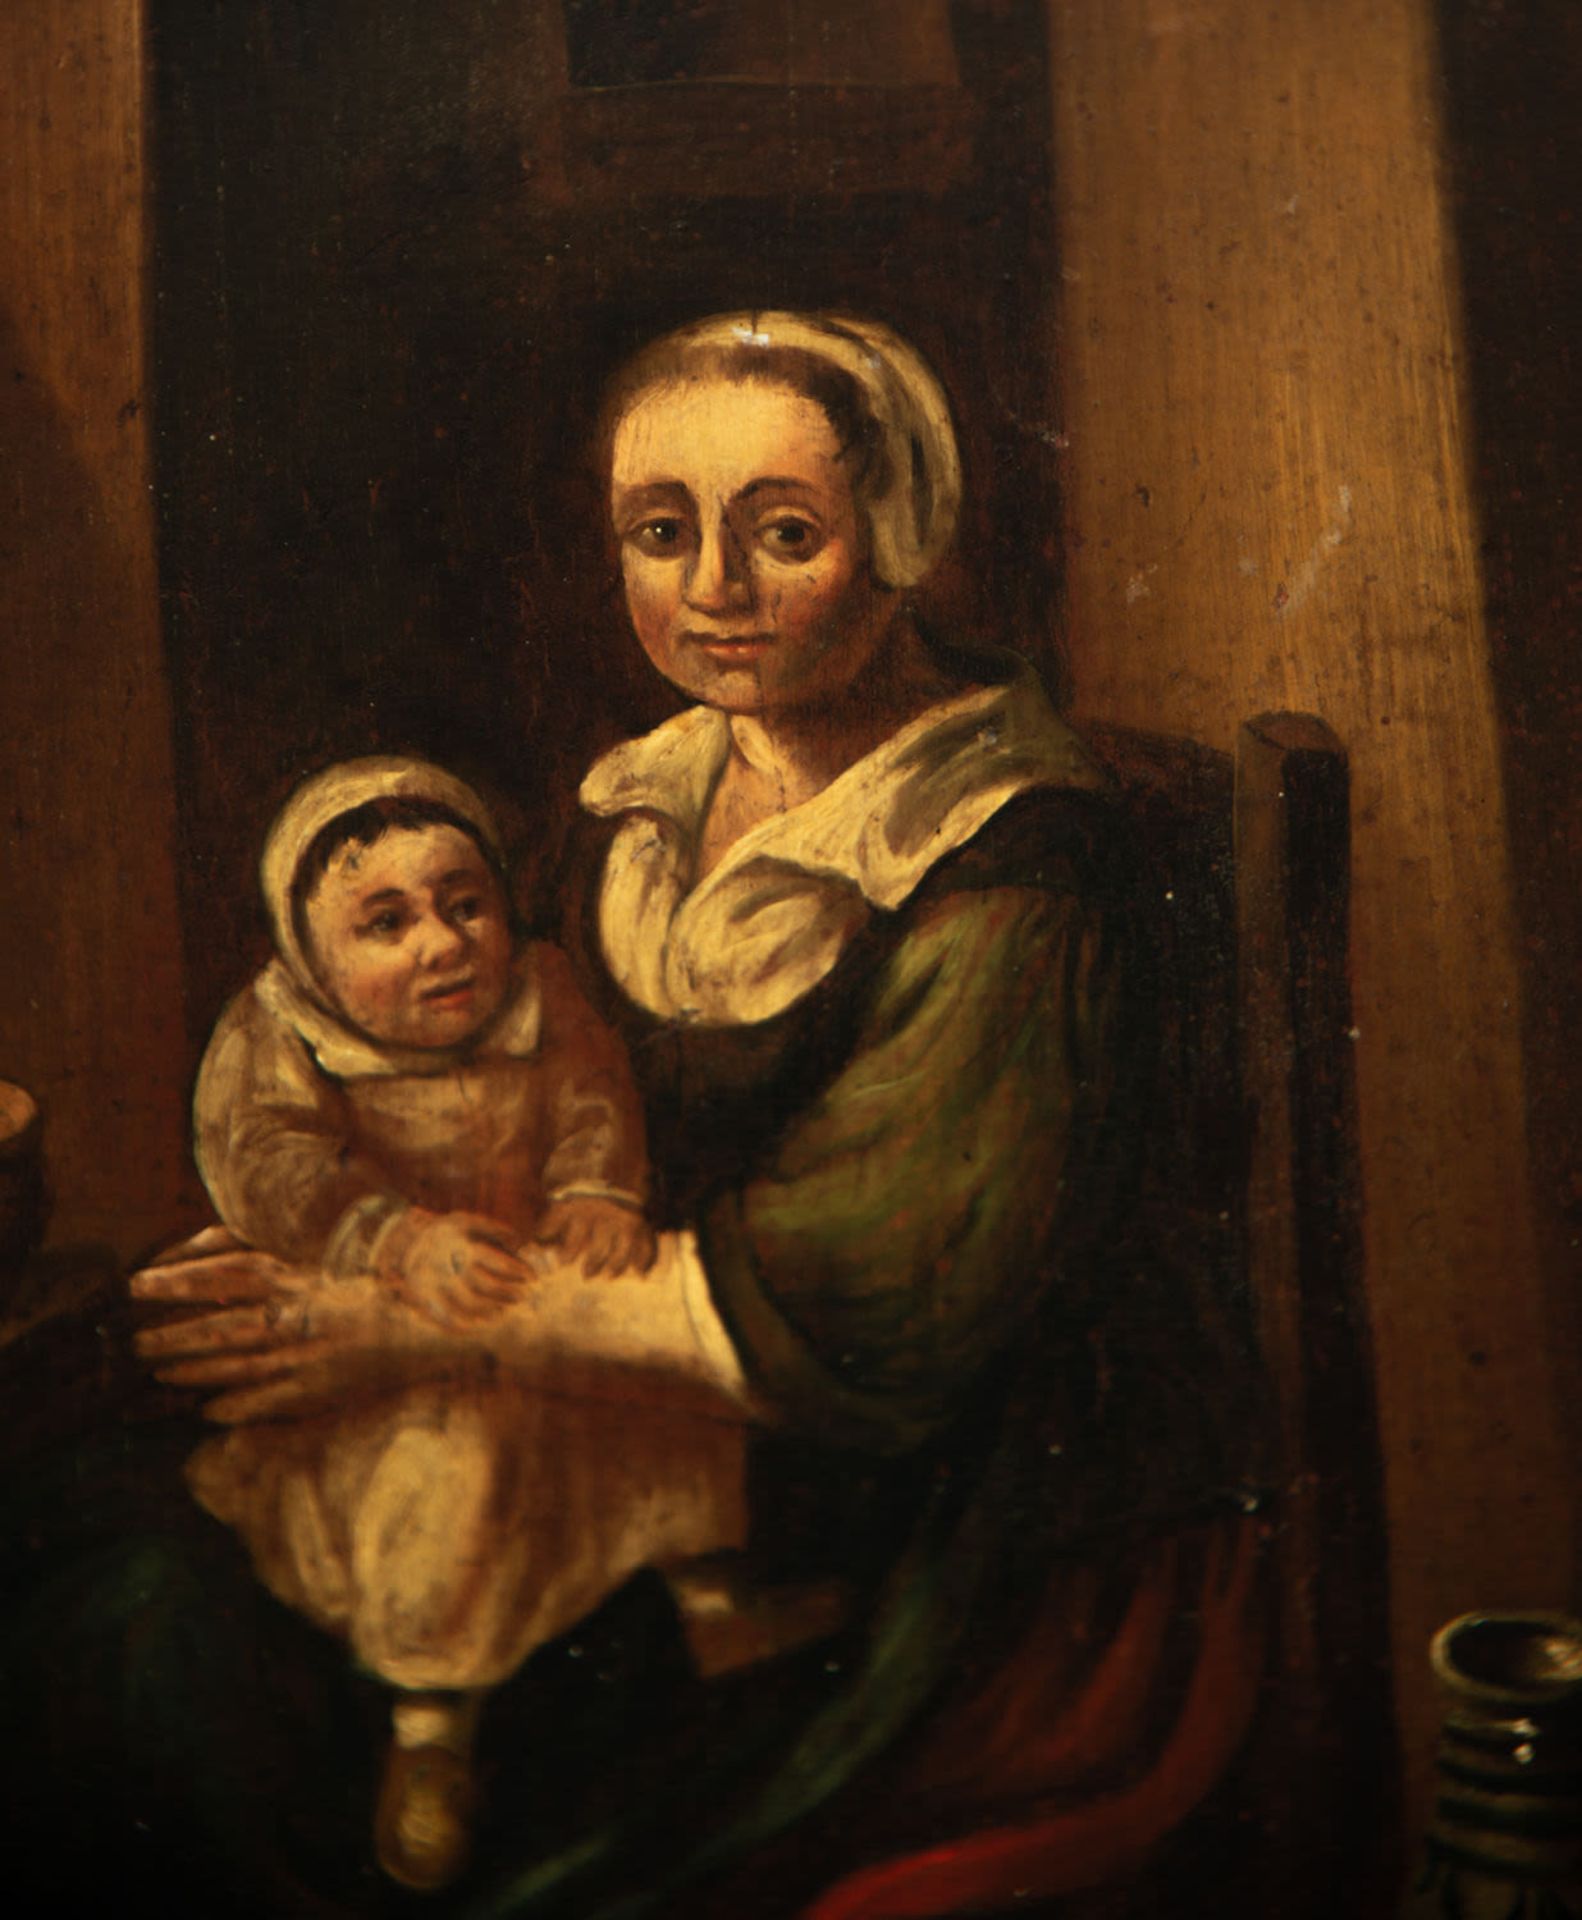 Woman with child, 17th century Flemish school - Image 3 of 5